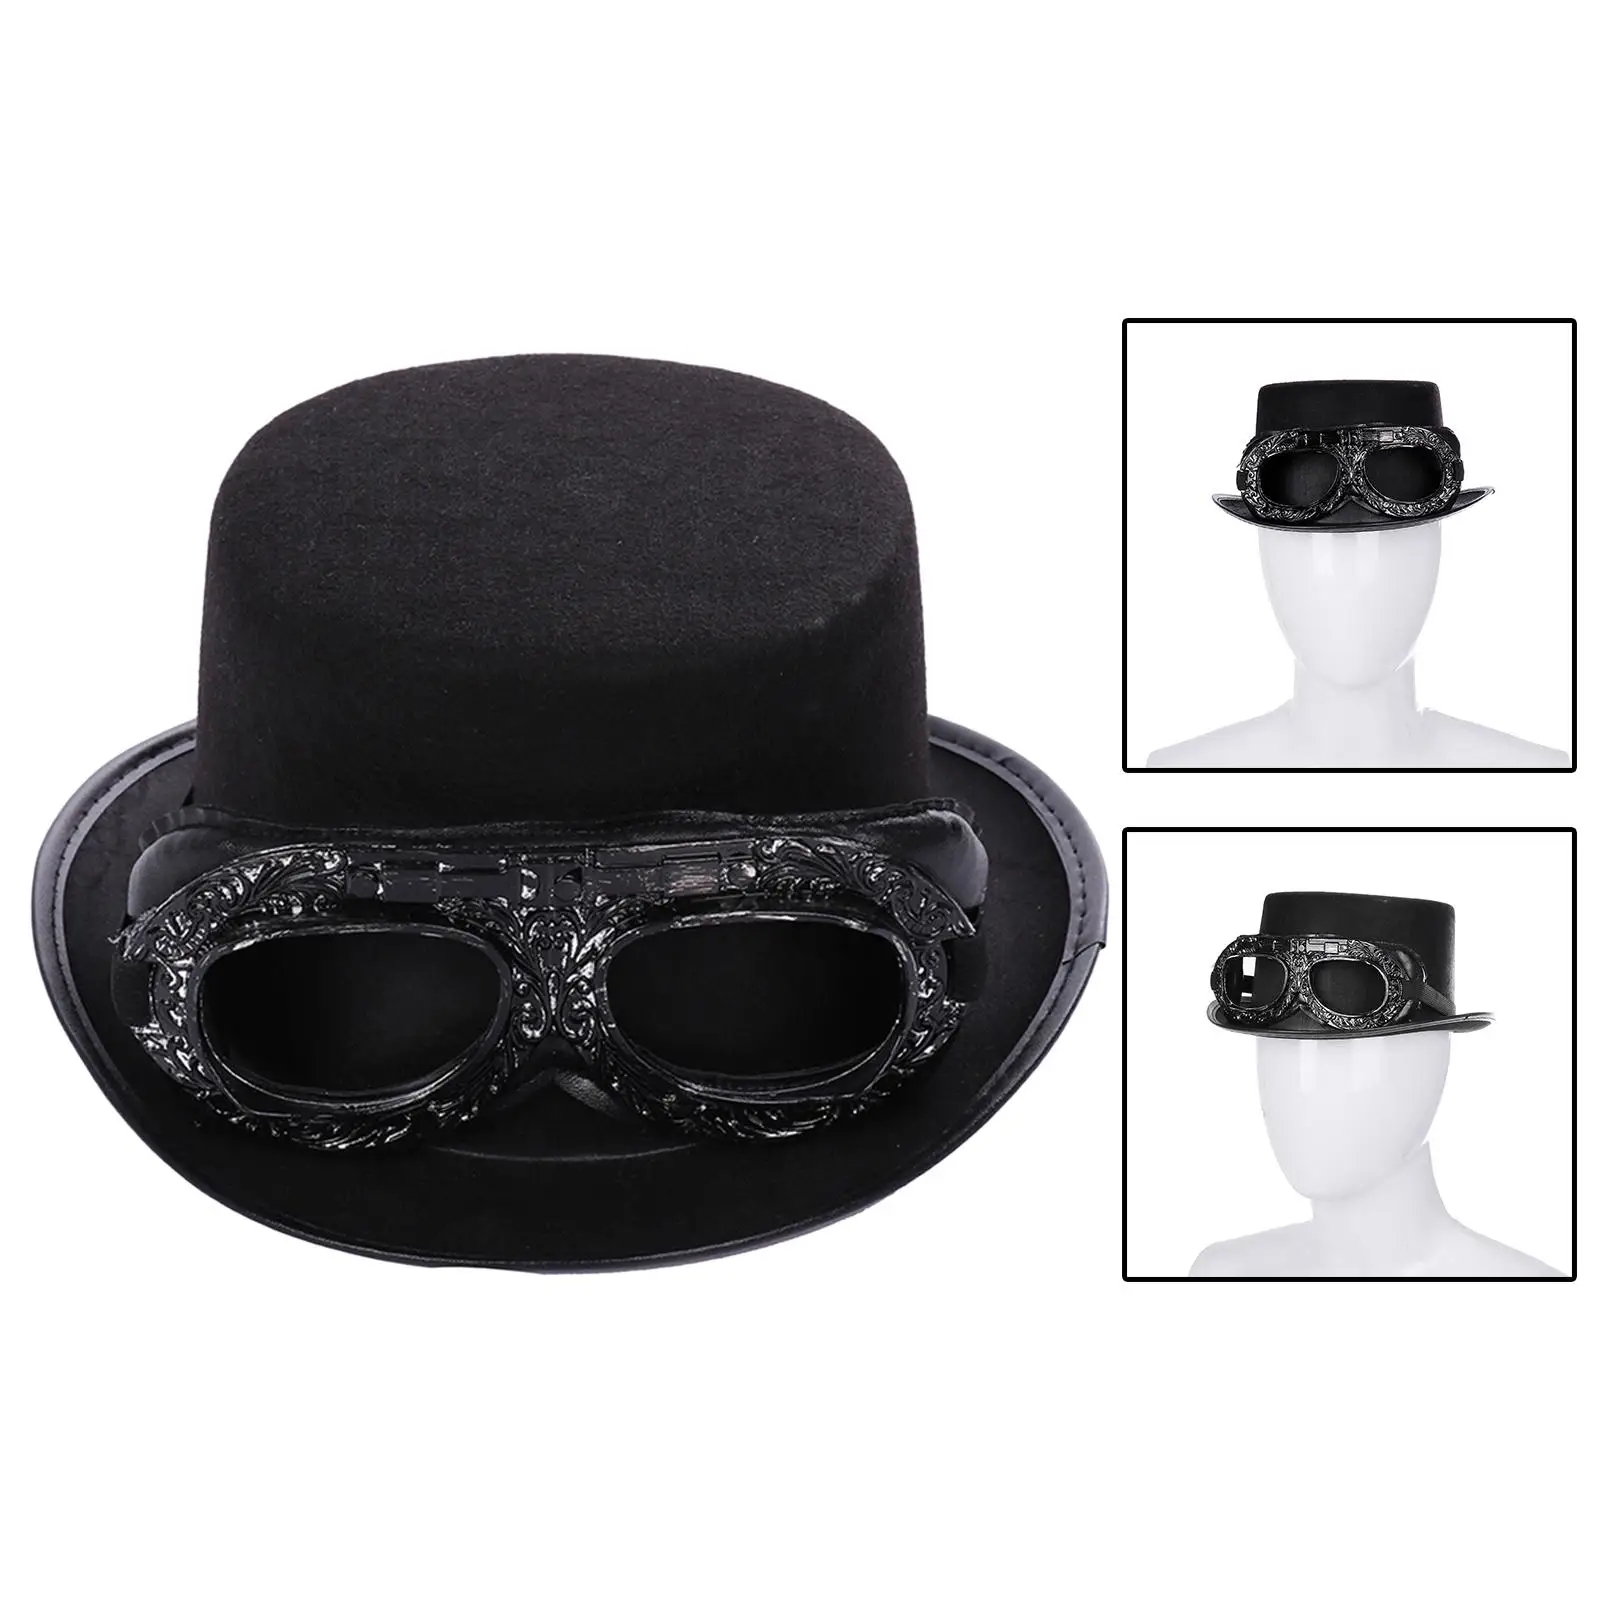 Deluxe Steampunk Top Hat with Goggles Gothic Vintage Style Formal Costume Top Hat Novelty Headgear for Men Women Dress Party